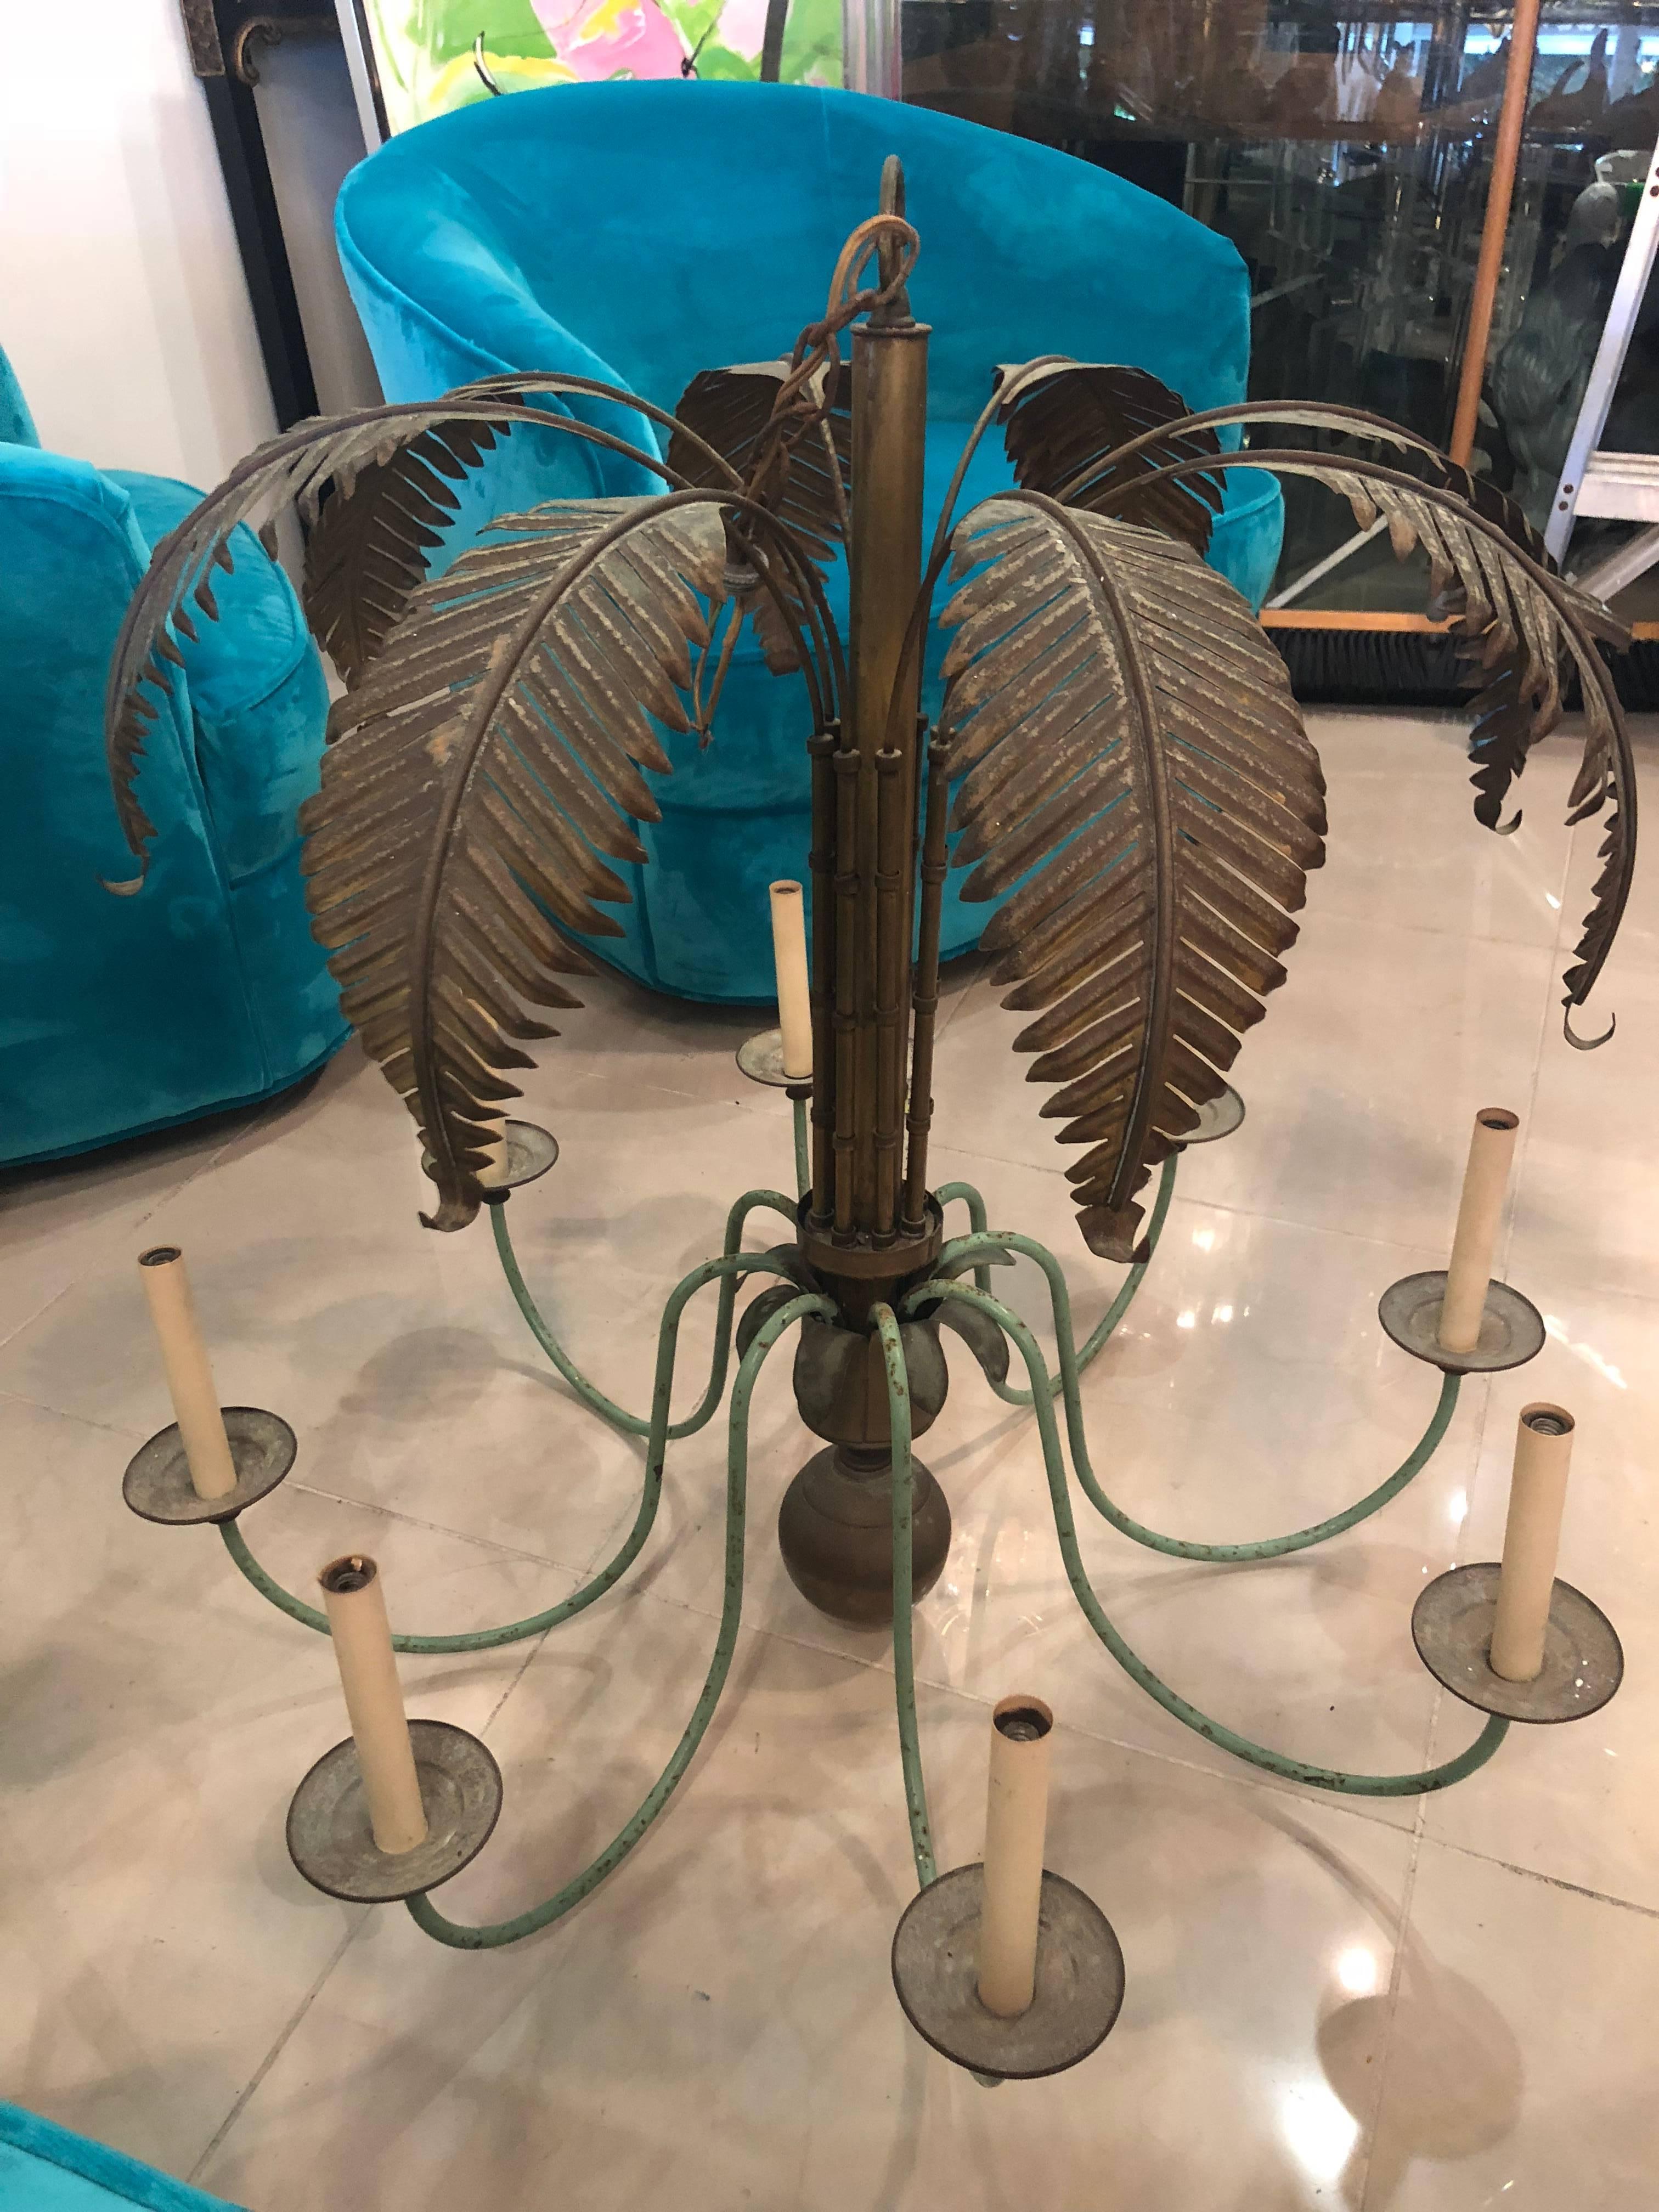 Vintage brass palm tree leaf frond chandelier. 8 lights. Comes with matching ceiling canopy. Candelabra sleeves and sockets will be newly replaced. This has not been polished and has patina and natural aging. The arms are a light green paint.